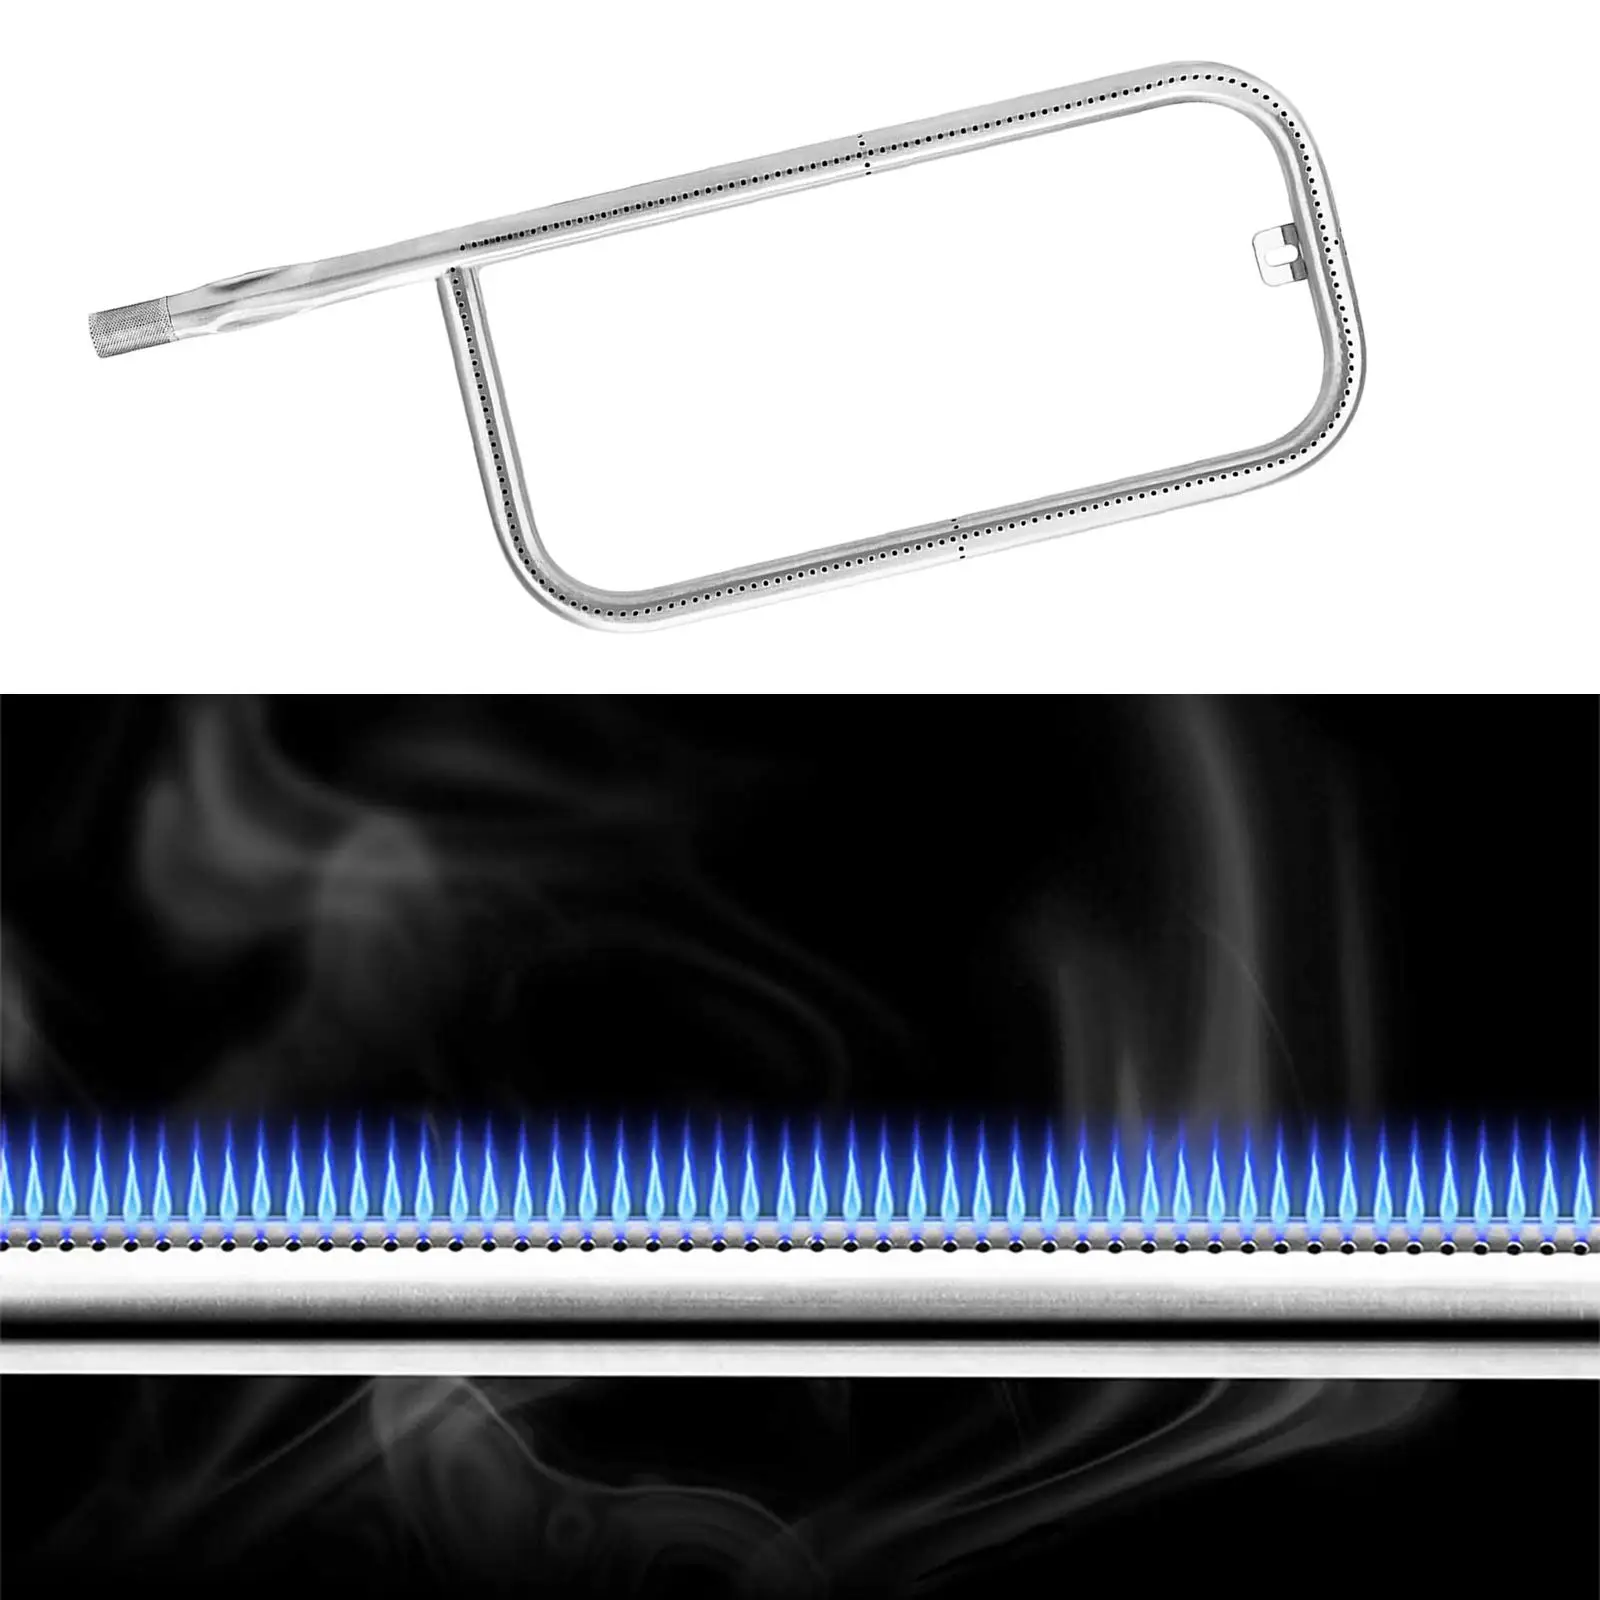 Stainless Steel Burner Tube Web69956 Parts Gas Rack Grill Burner for Q200 Q220 Q2000 Q2200 396000 396002 396001 Easy to Install